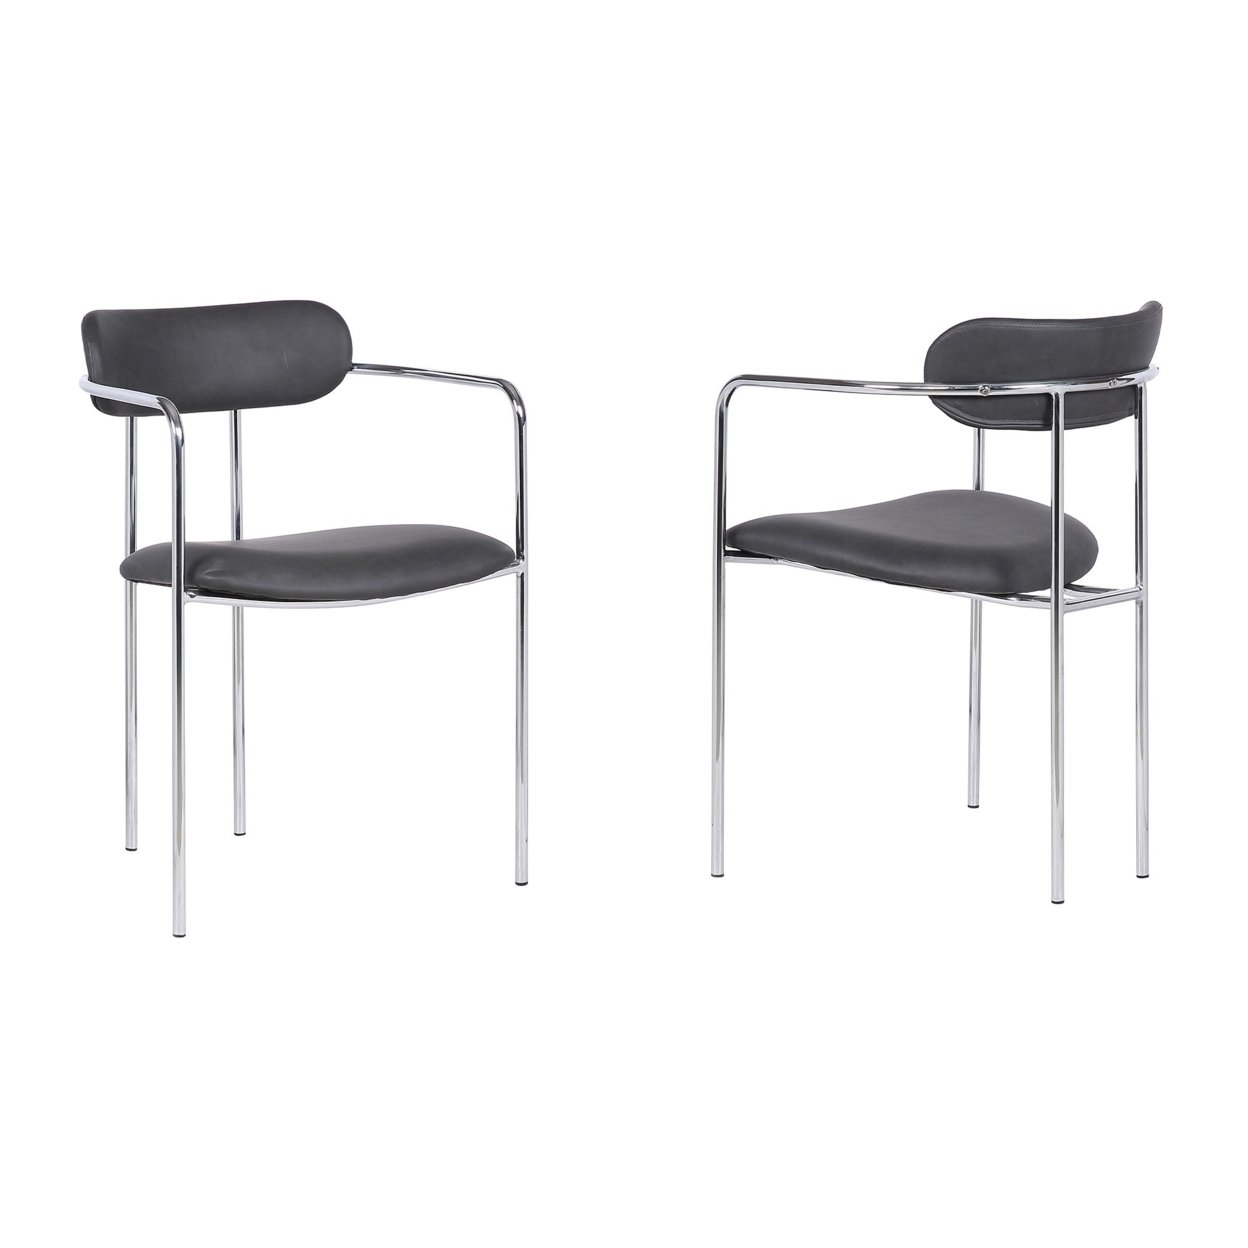 Metal And Leatherette Dining Chair, Set Of 2, Silver And Gray- Saltoro Sherpi